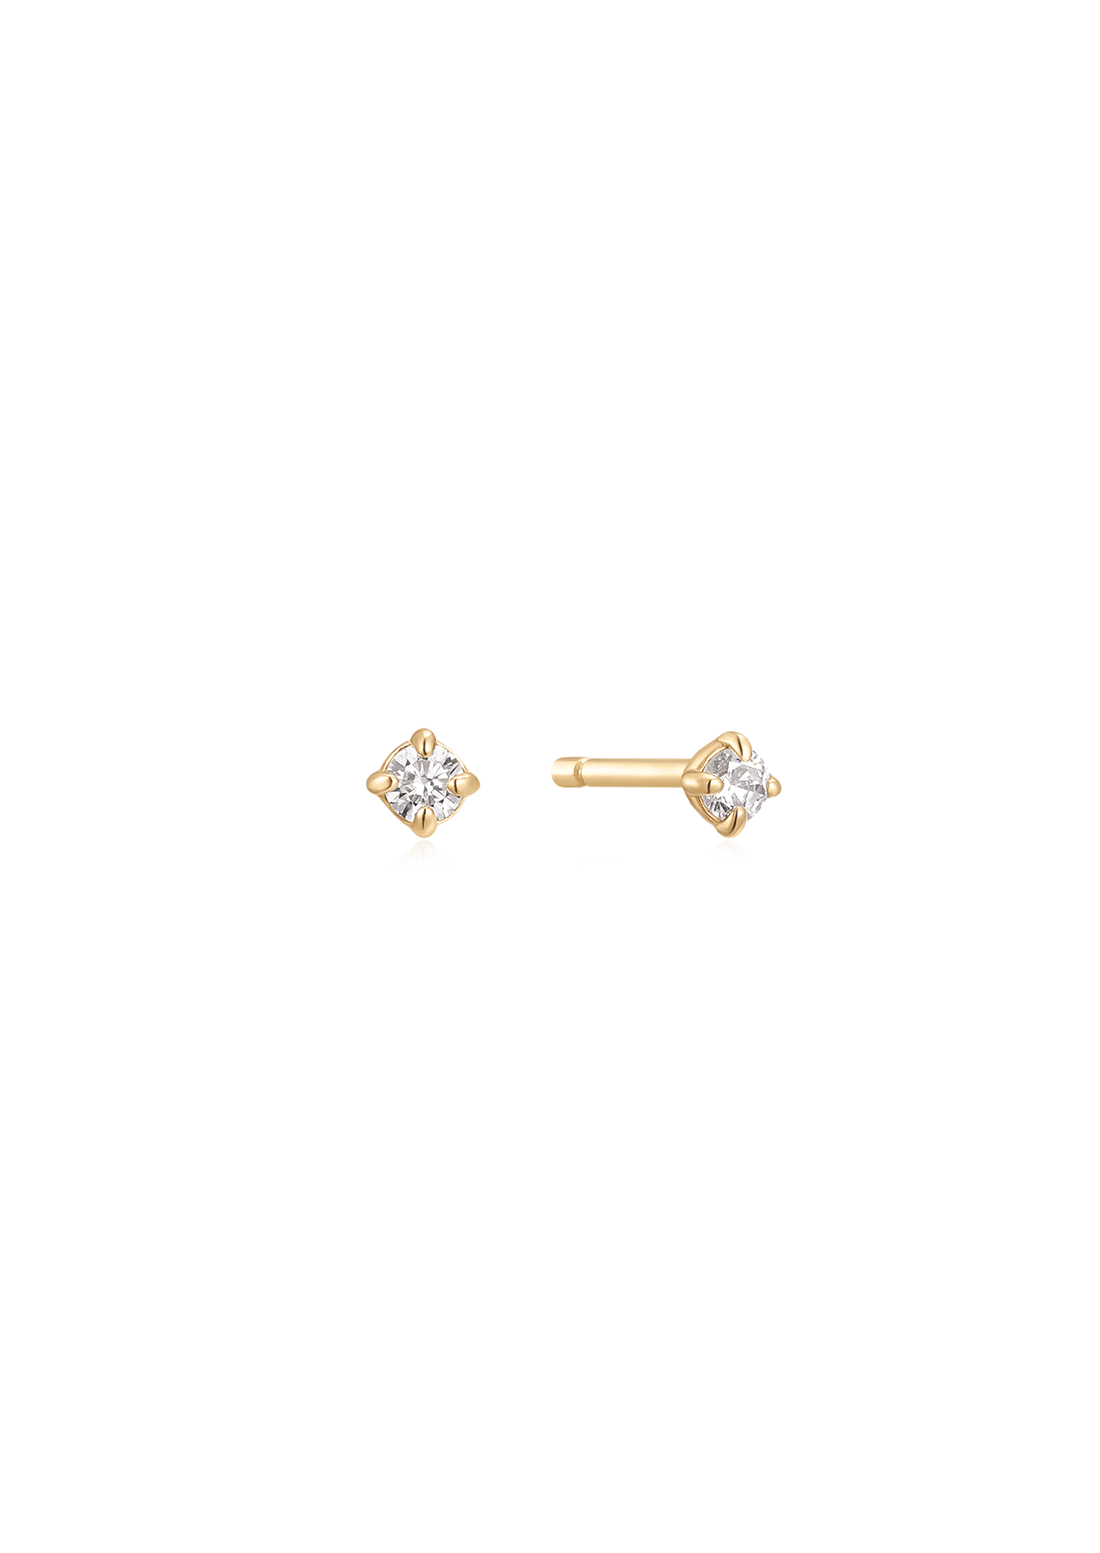 The Lune Cultured Diamond 9ct Solid Gold Stud Earrings (Pair) - Molten Store